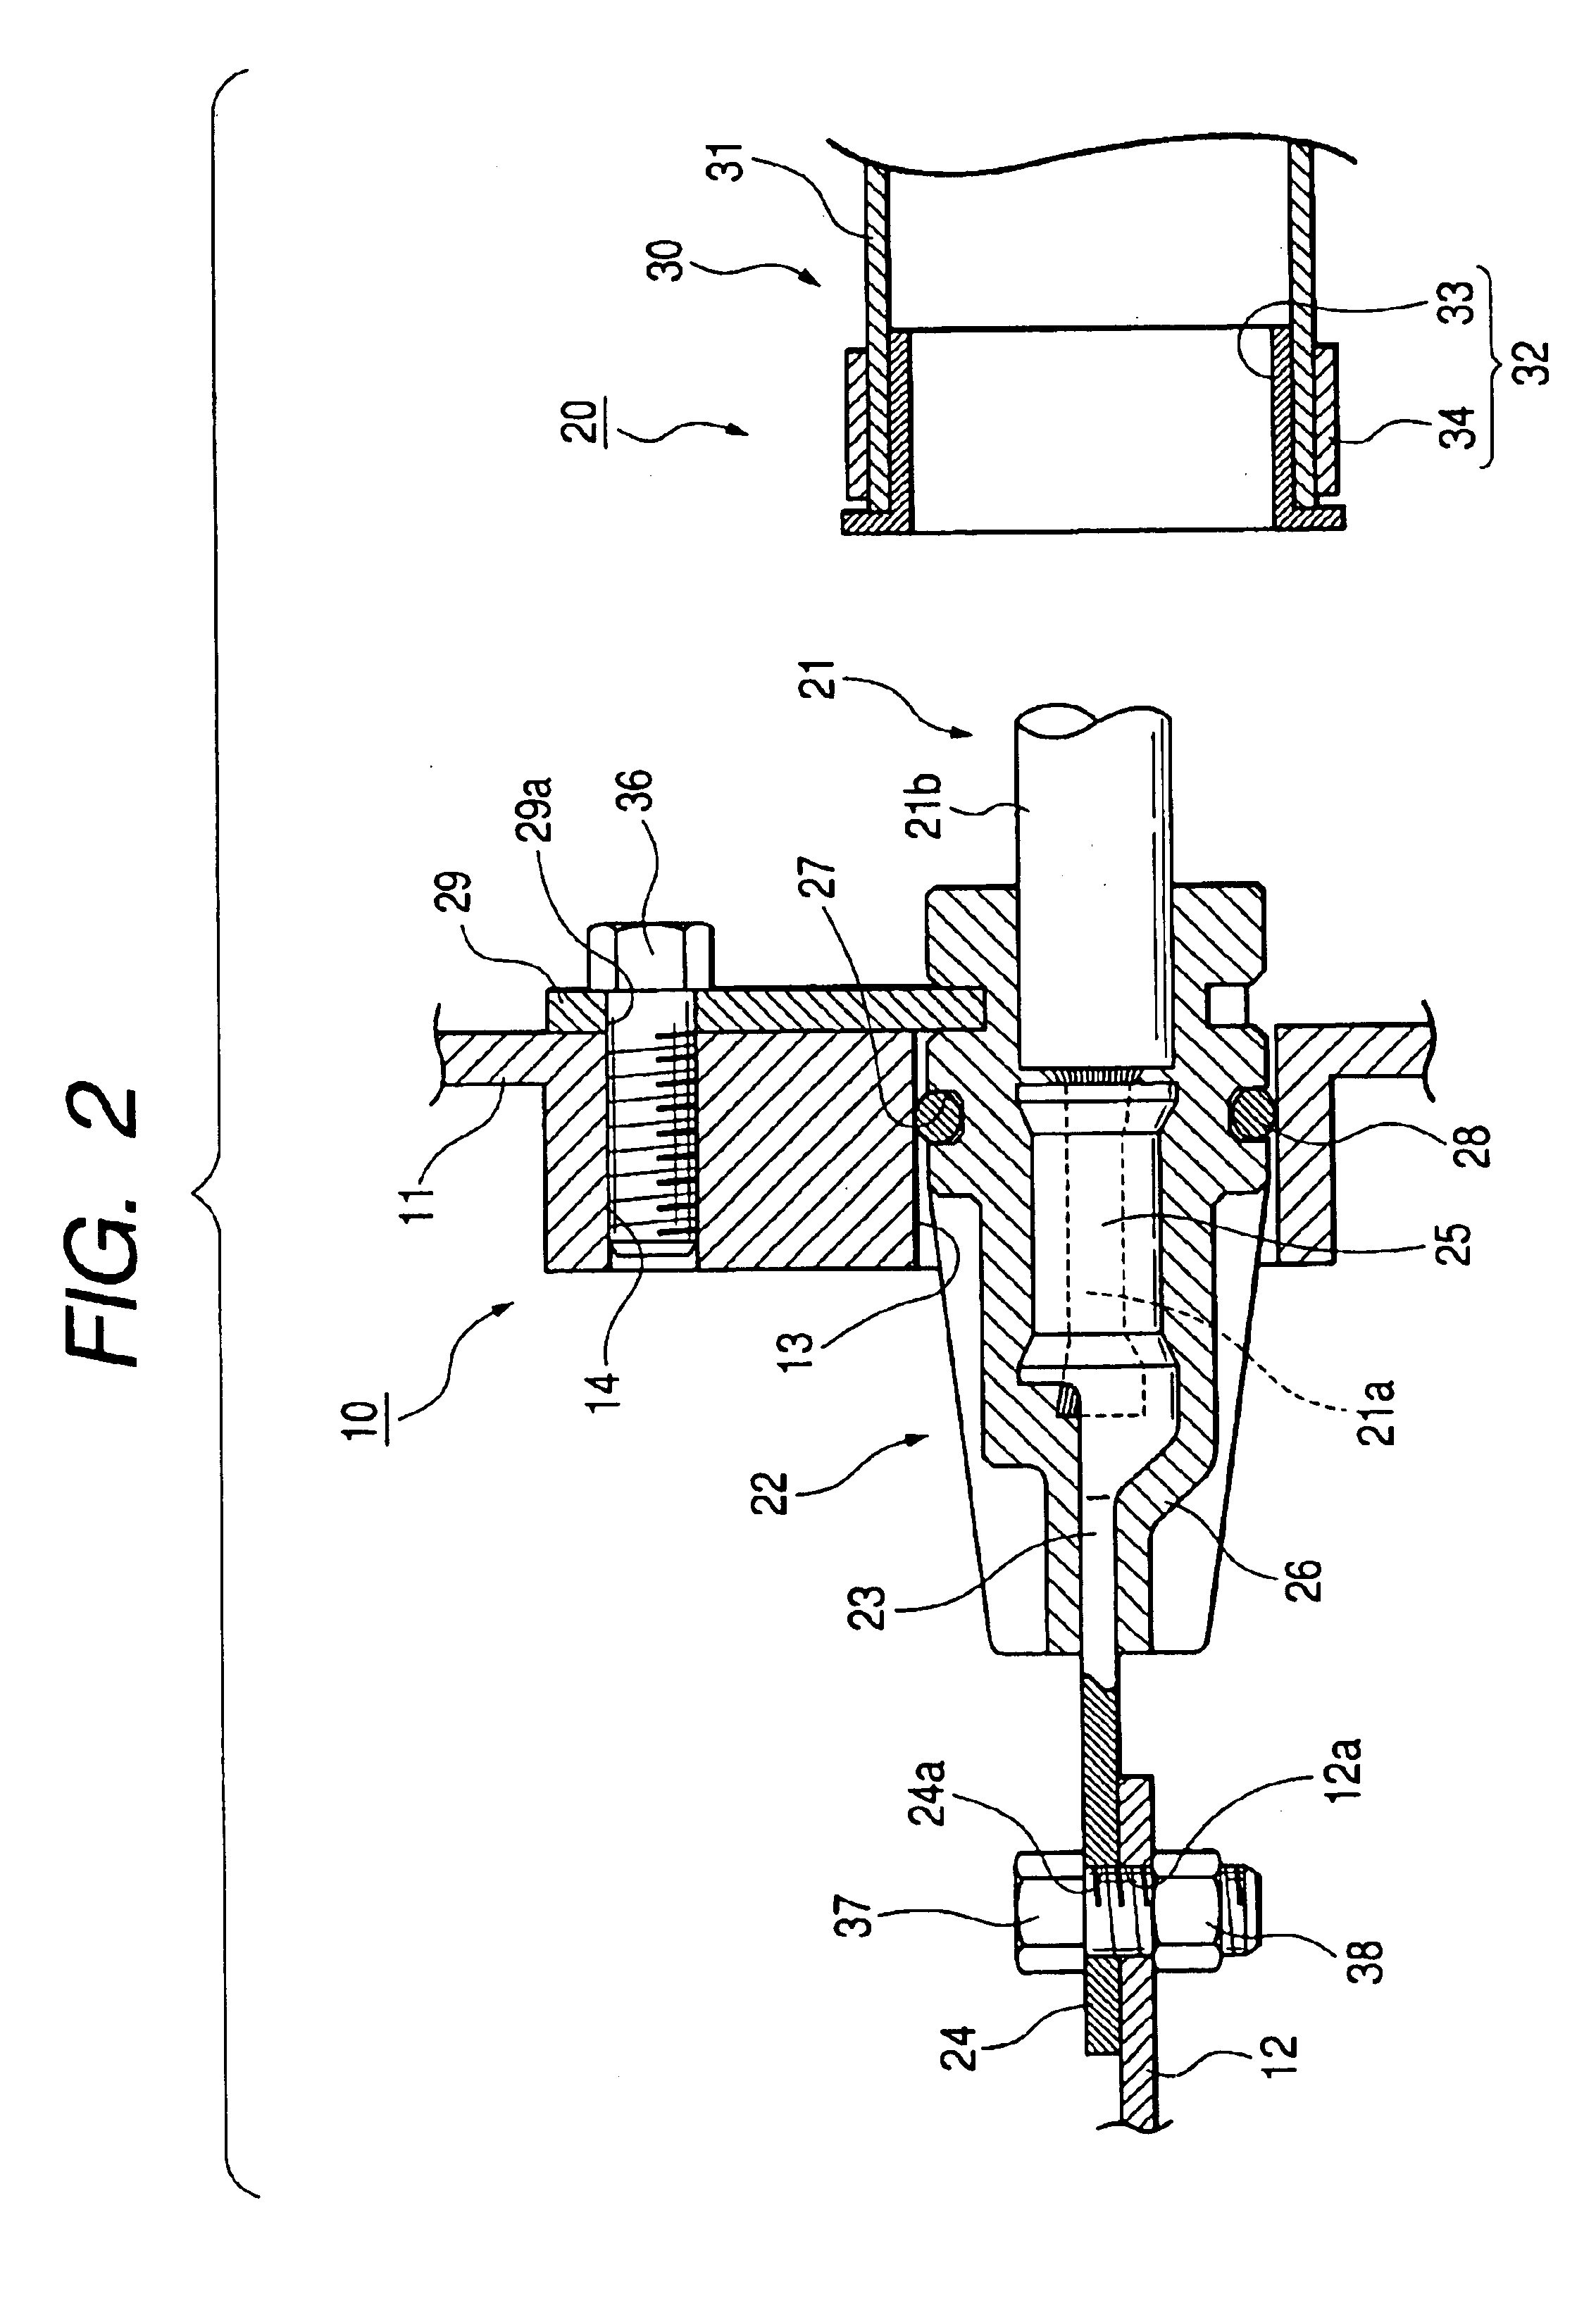 Equipment-mounting wire harness